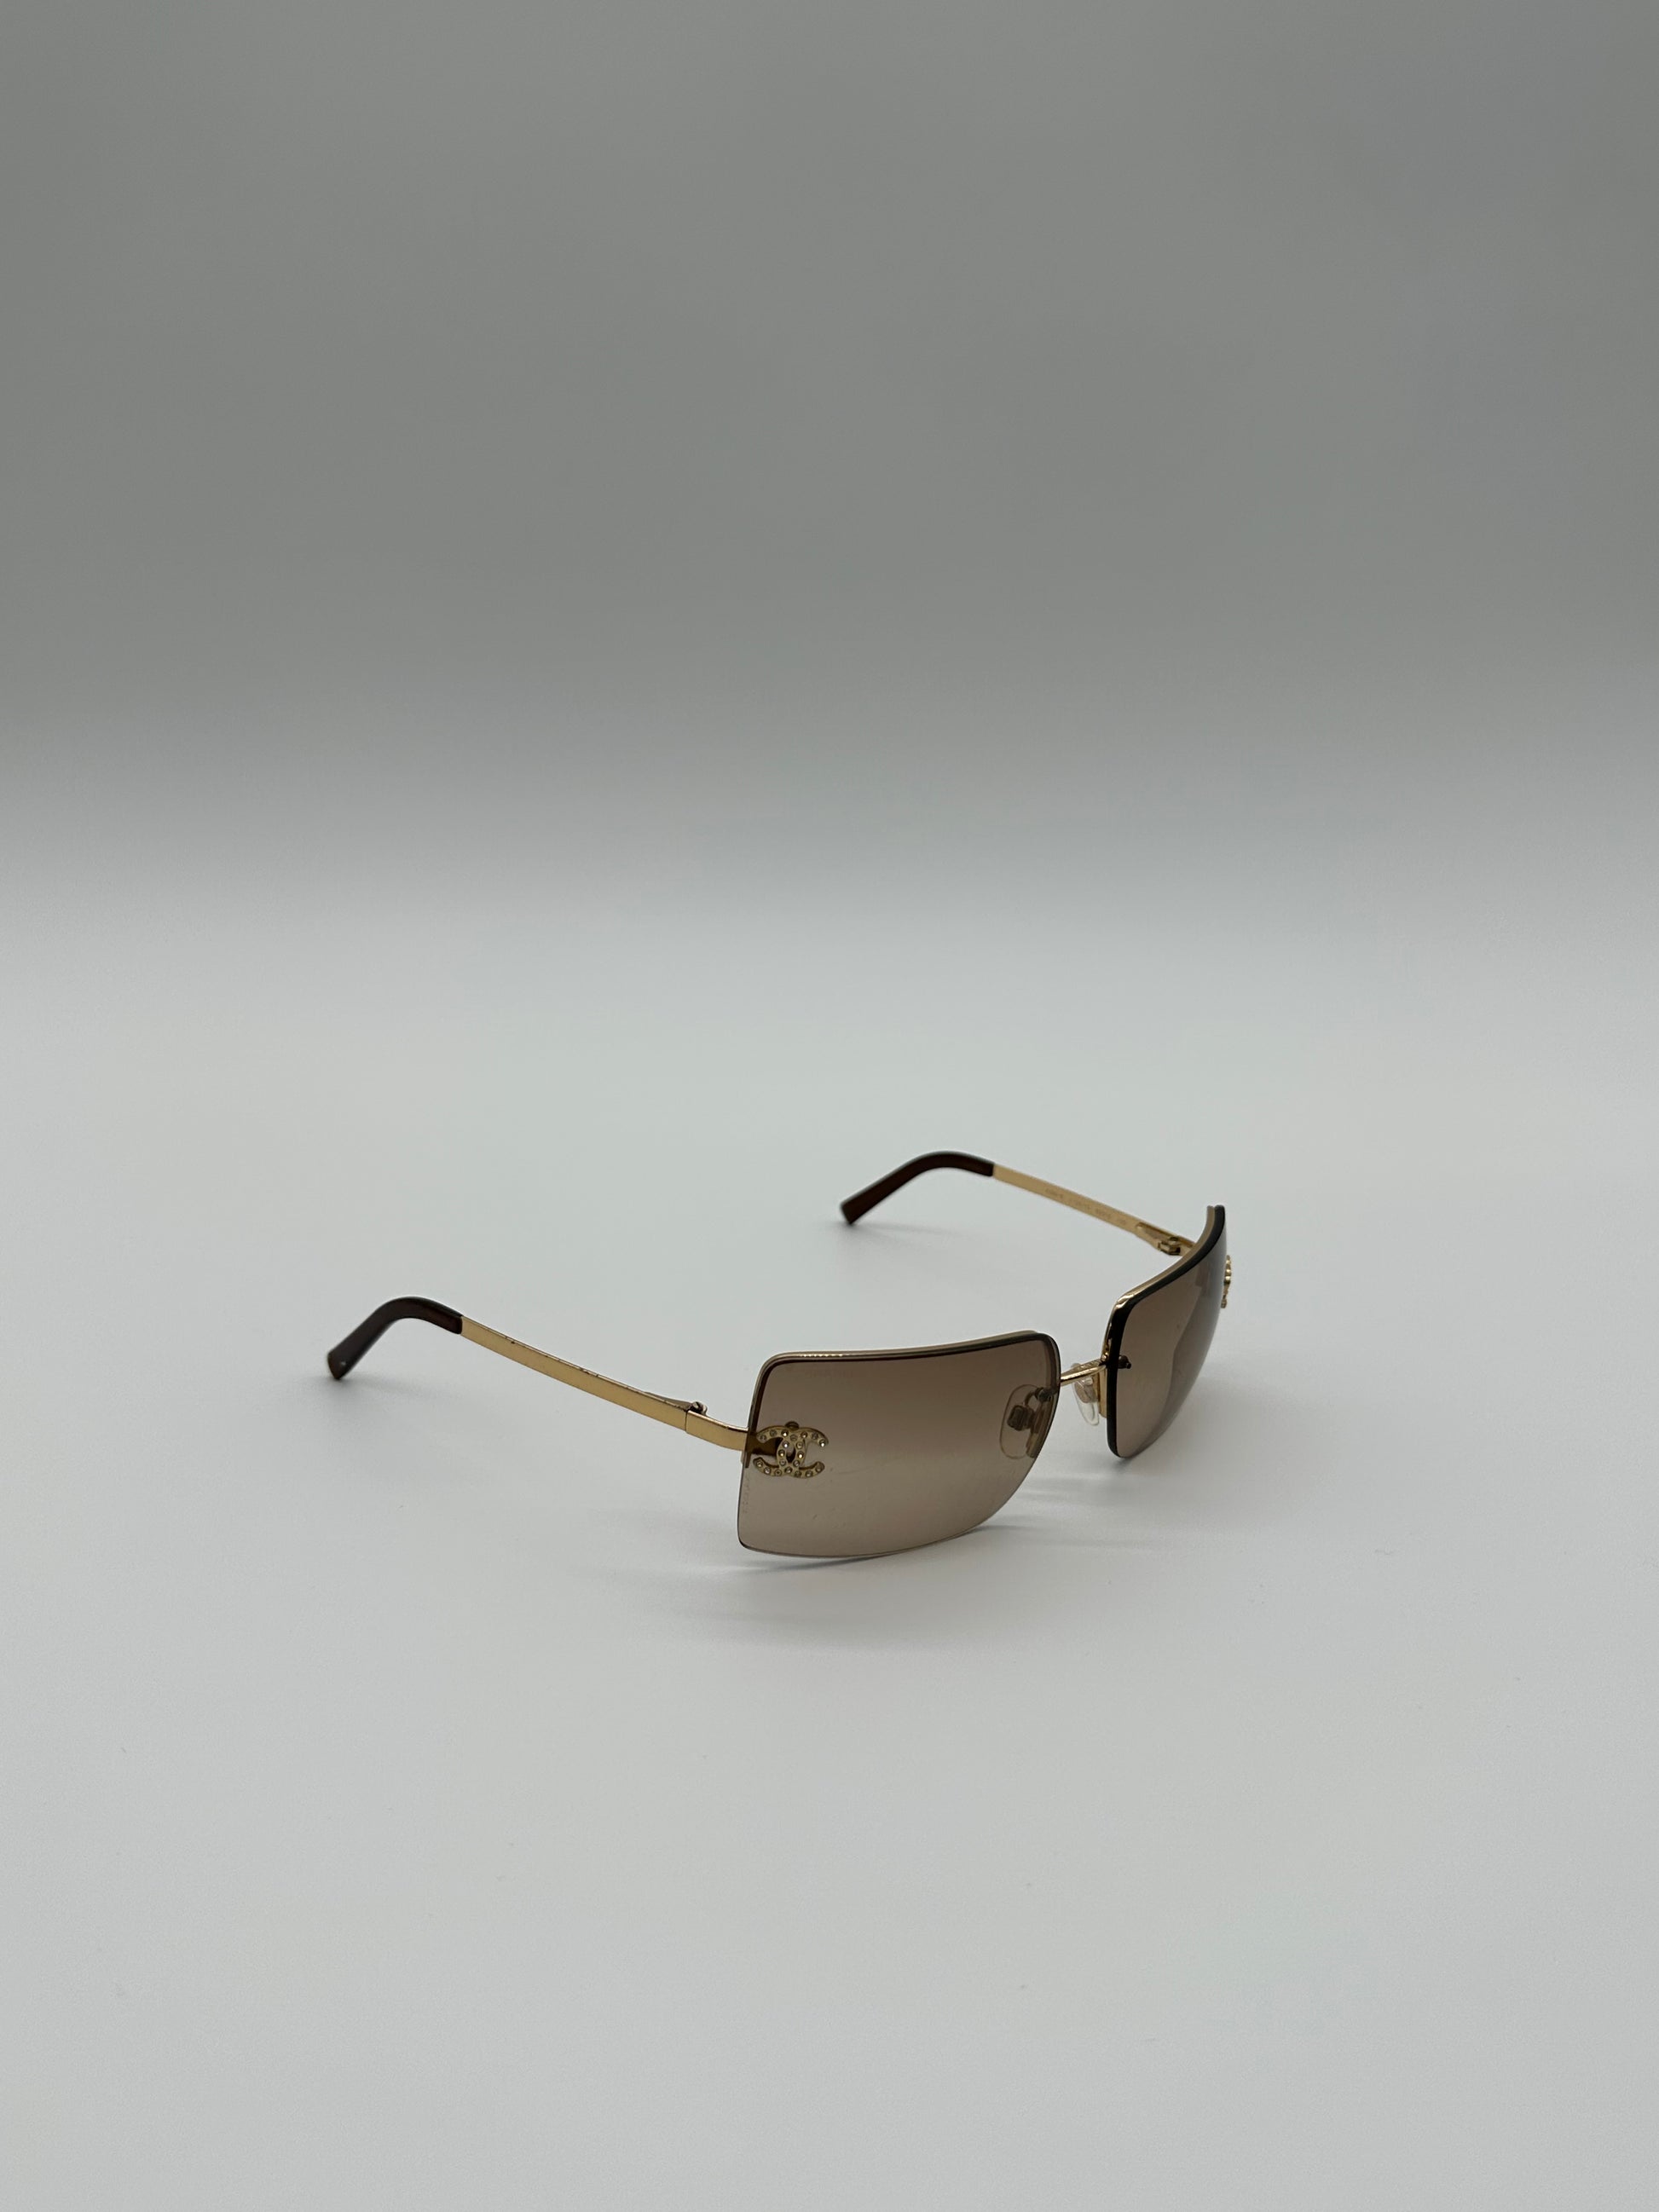 Vintage Gold Rimmed Chanel Sunglasses – by nothing new